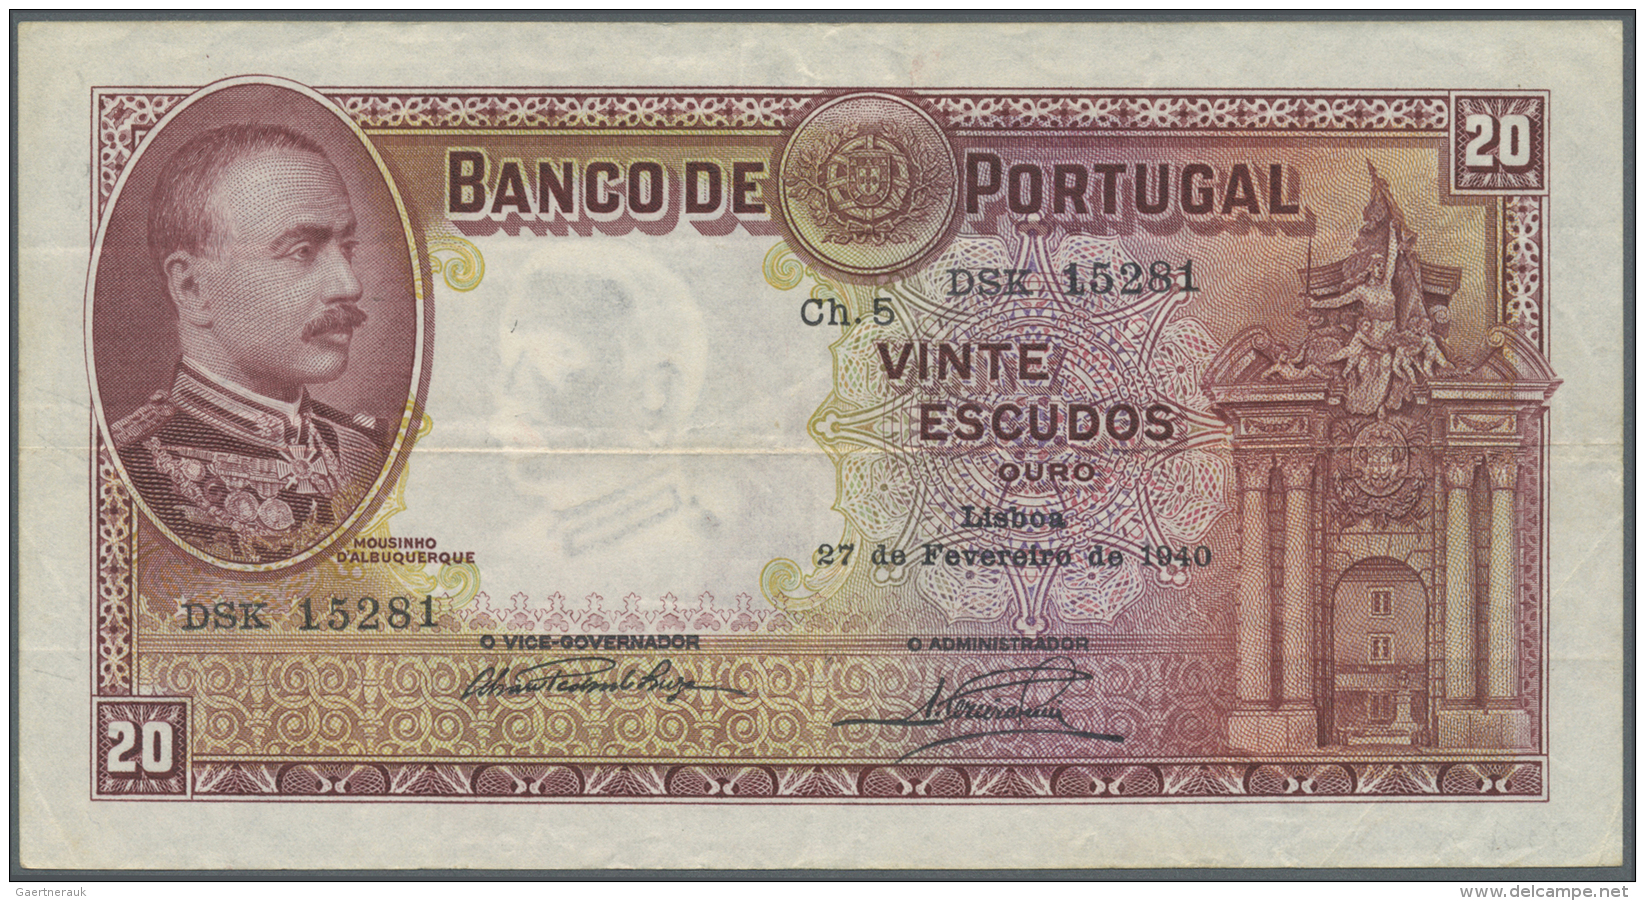 Portugal: 20 Escudos 1940 P. 143, Used With Folds In Paper But No Holes Or Tears, Paper Very Crisp And Colors Original, - Portugal